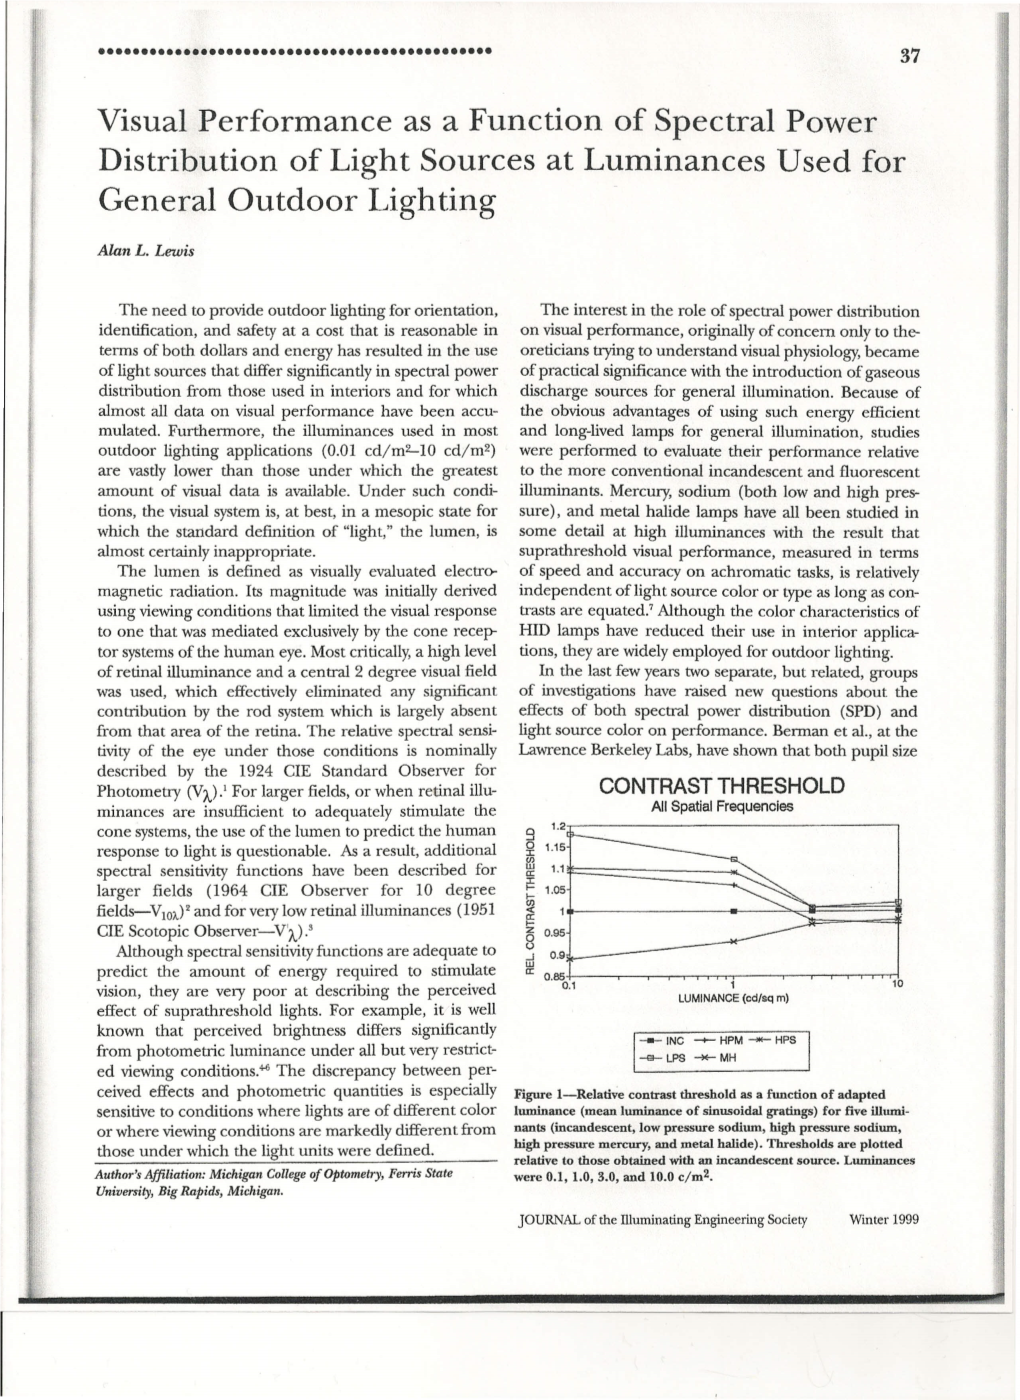 Visual Performance As a Function of Spectral Power Distribution of Light Sources at Luminances Used for General Outdoor Lighting